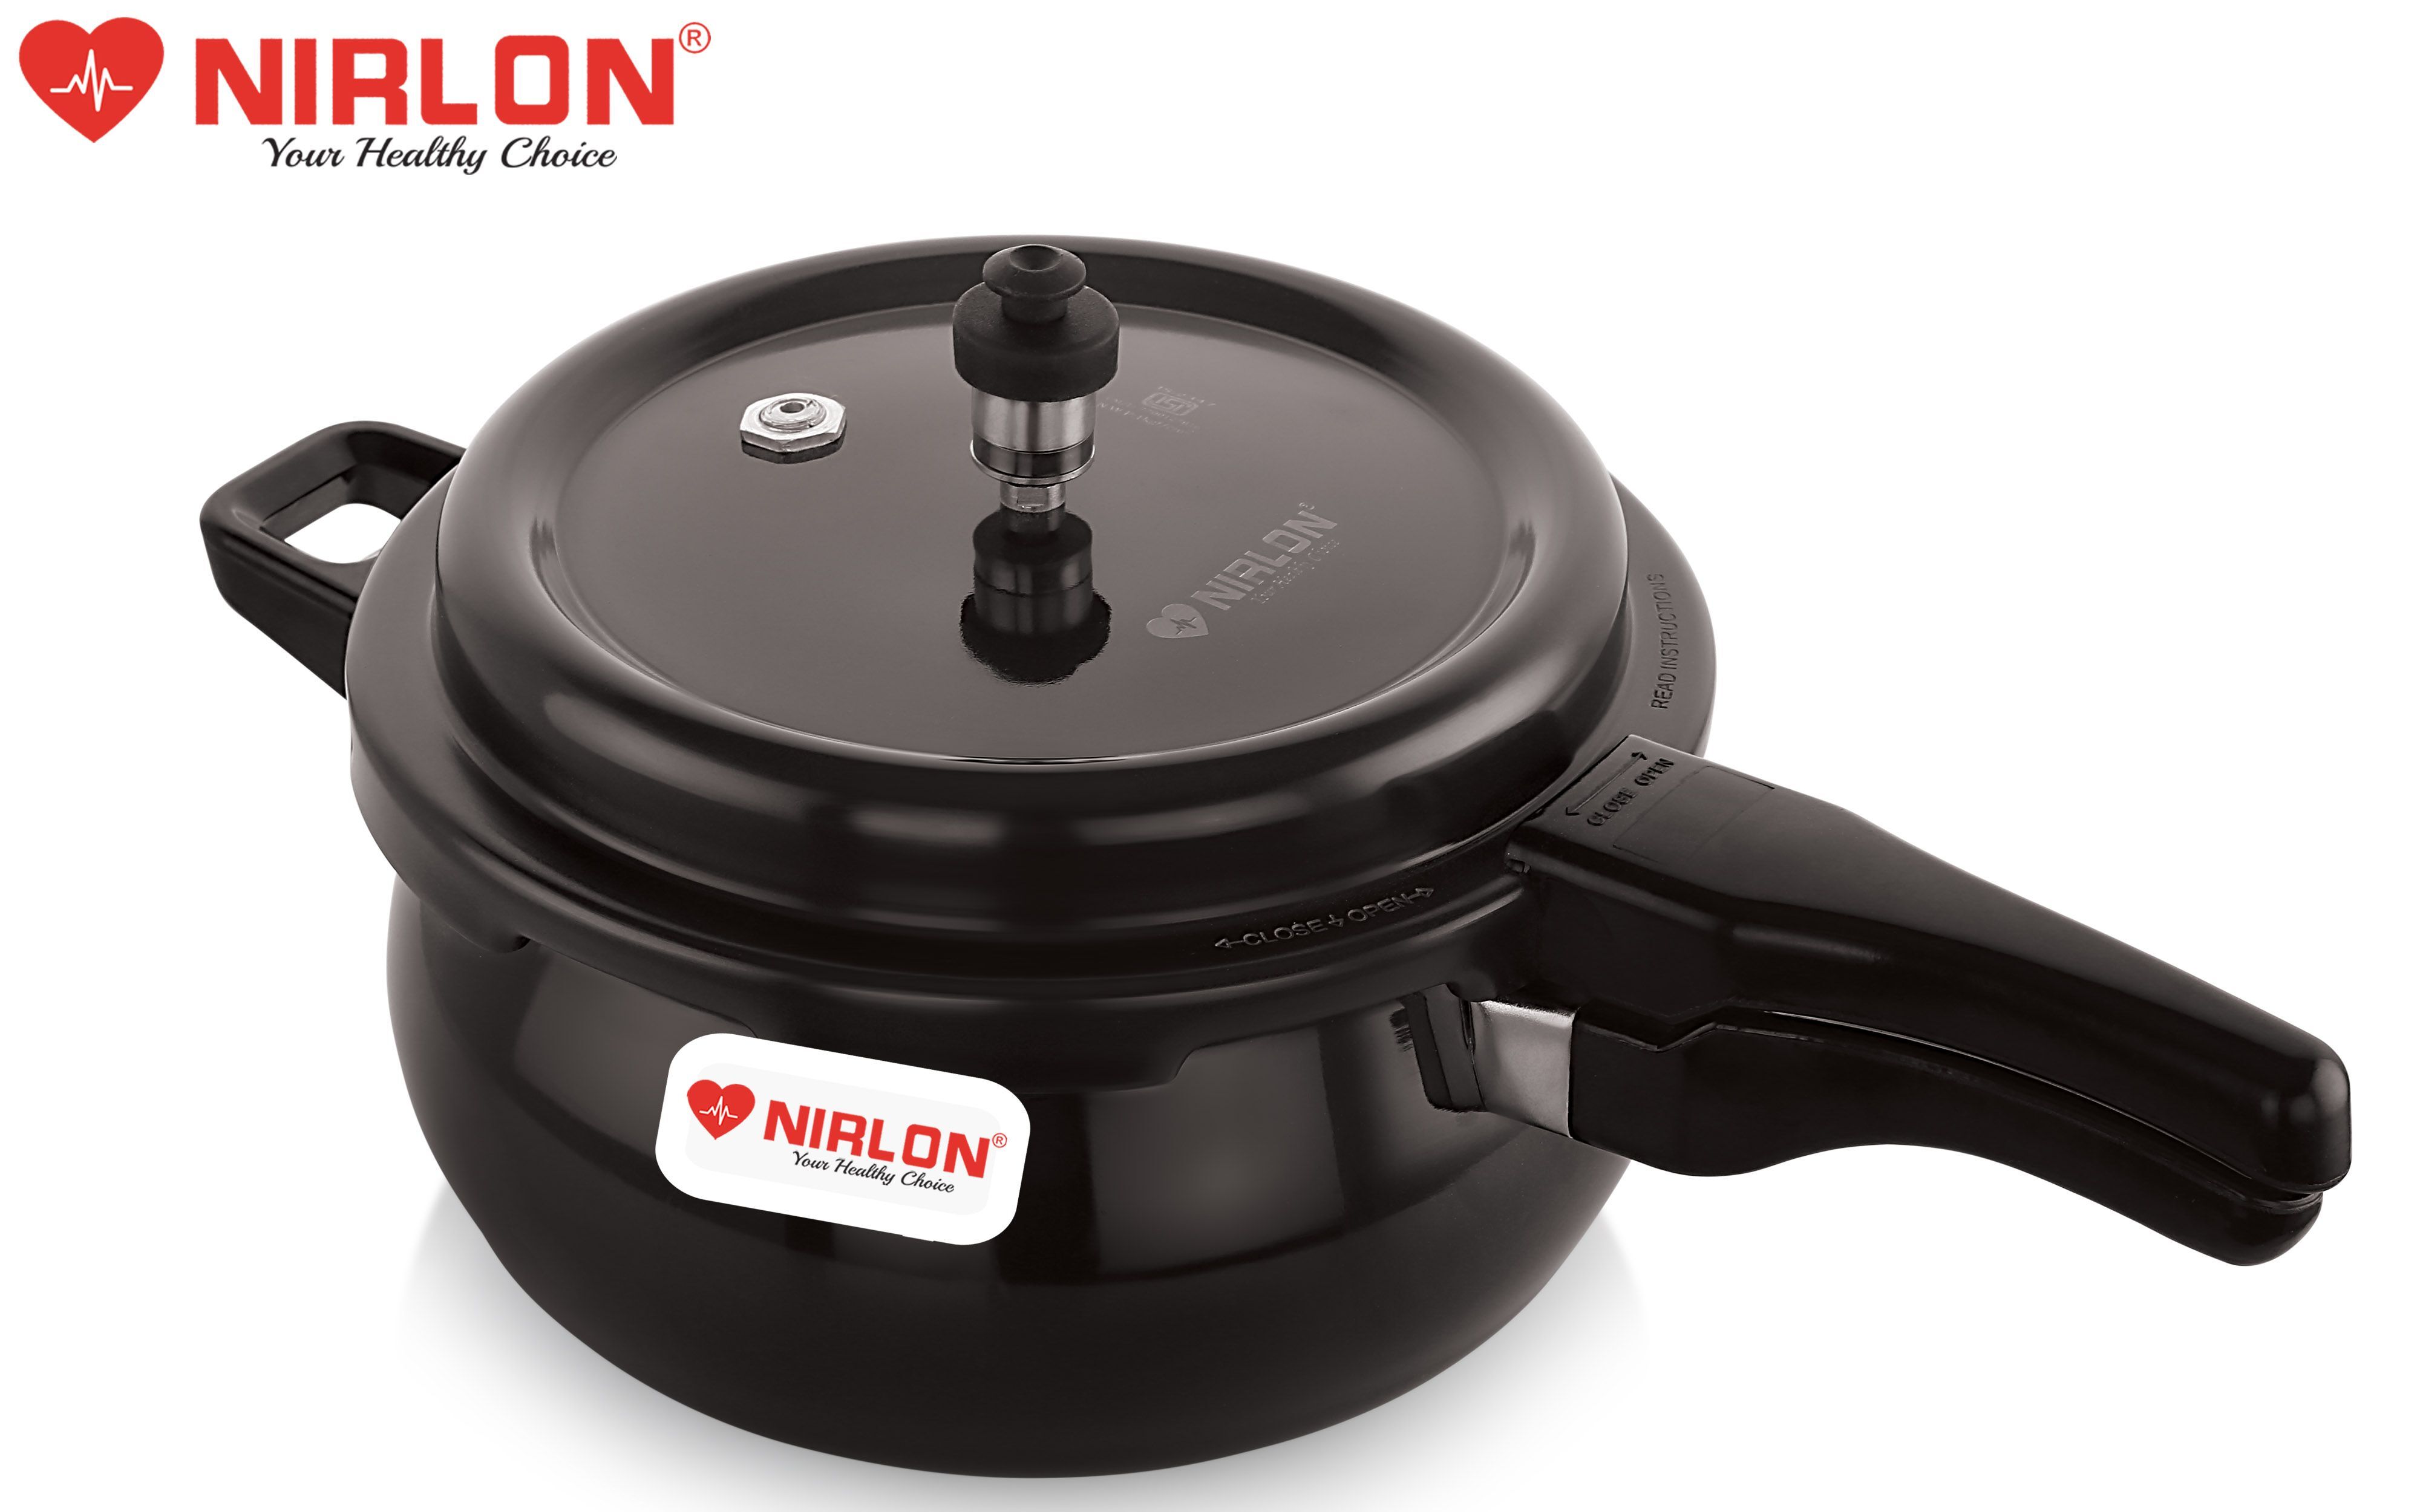 7ltr - Hard Anodized Handi Outer LID Pressure Cooker